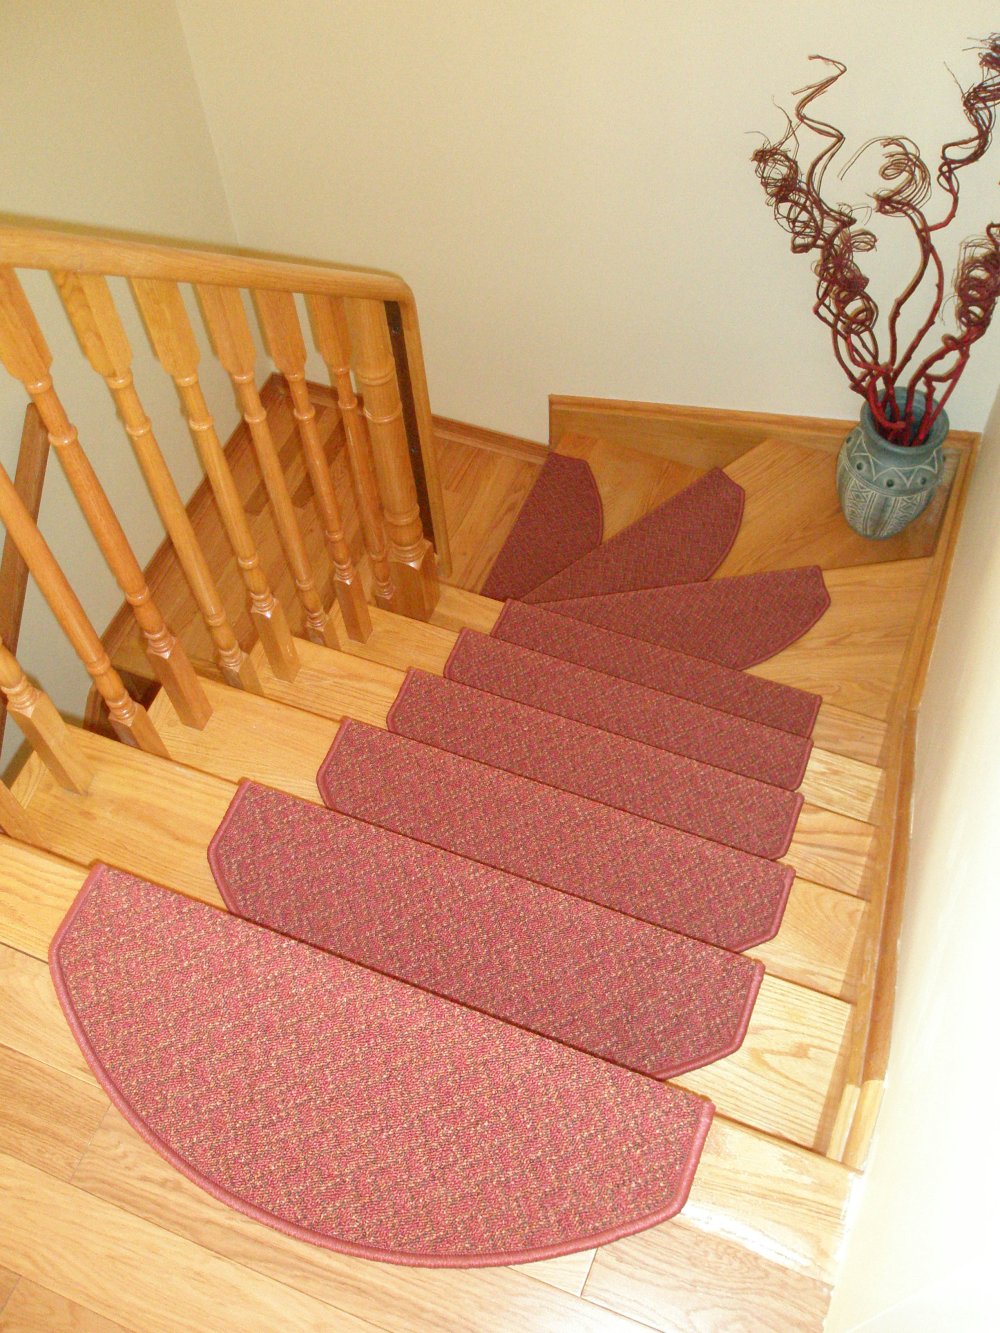 Carpet Stair Treads for Dogs, Pet's friendly Stair Mats, Affordable Stair Rugs